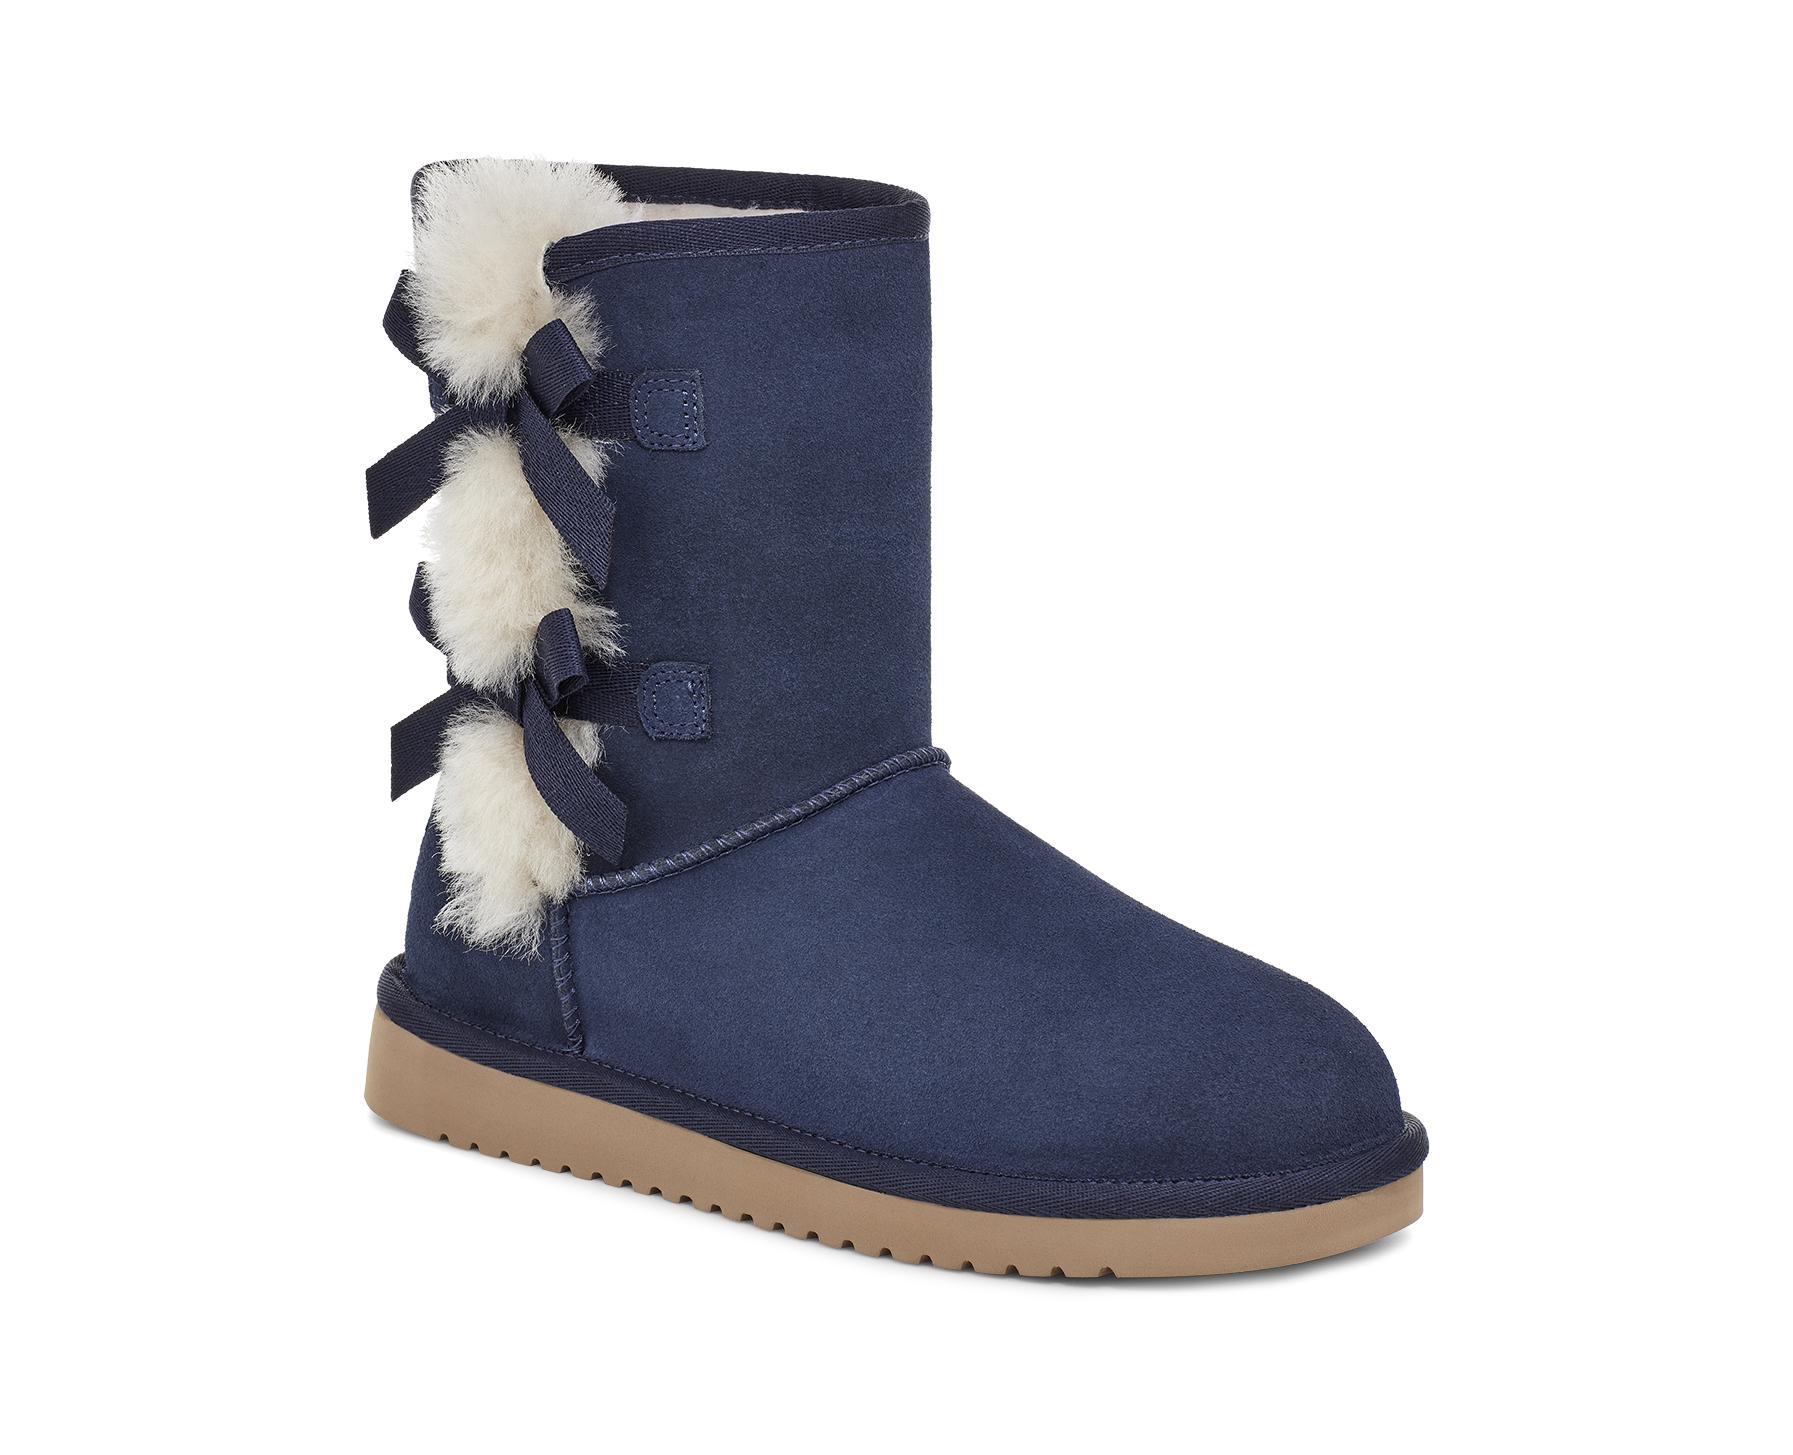 Koolaburra by UGG Victoria Short (Insignia Blue) Women's Boots Product Image